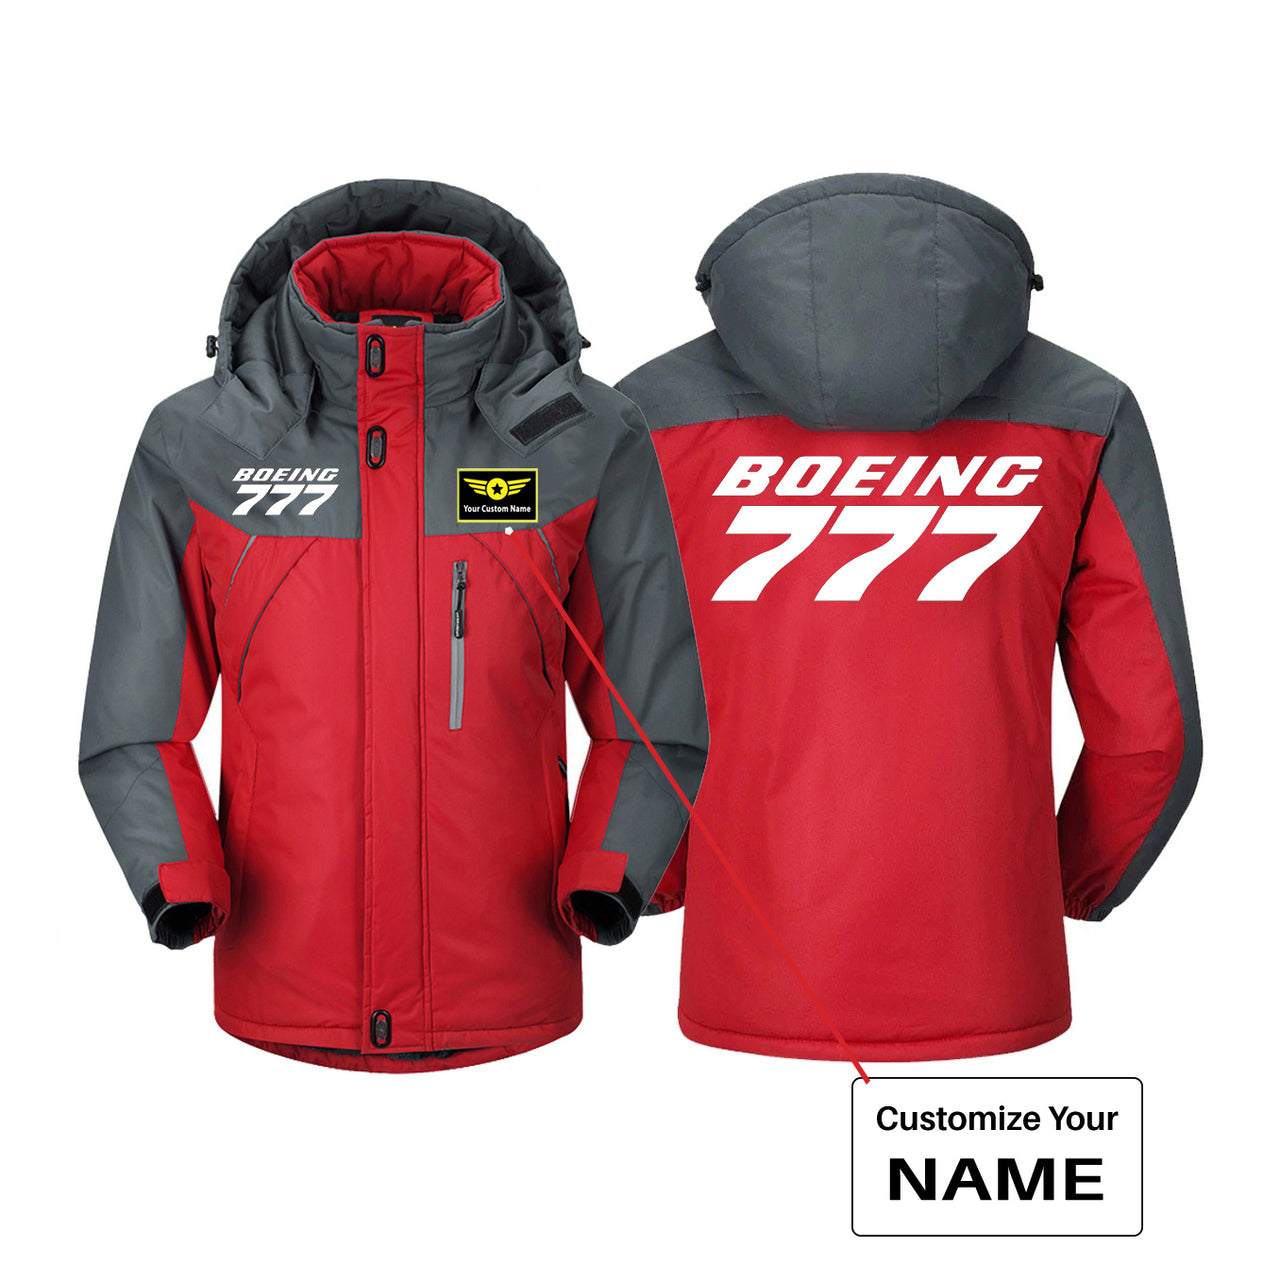 Boeing 777 & Text Designed Thick Winter Jackets